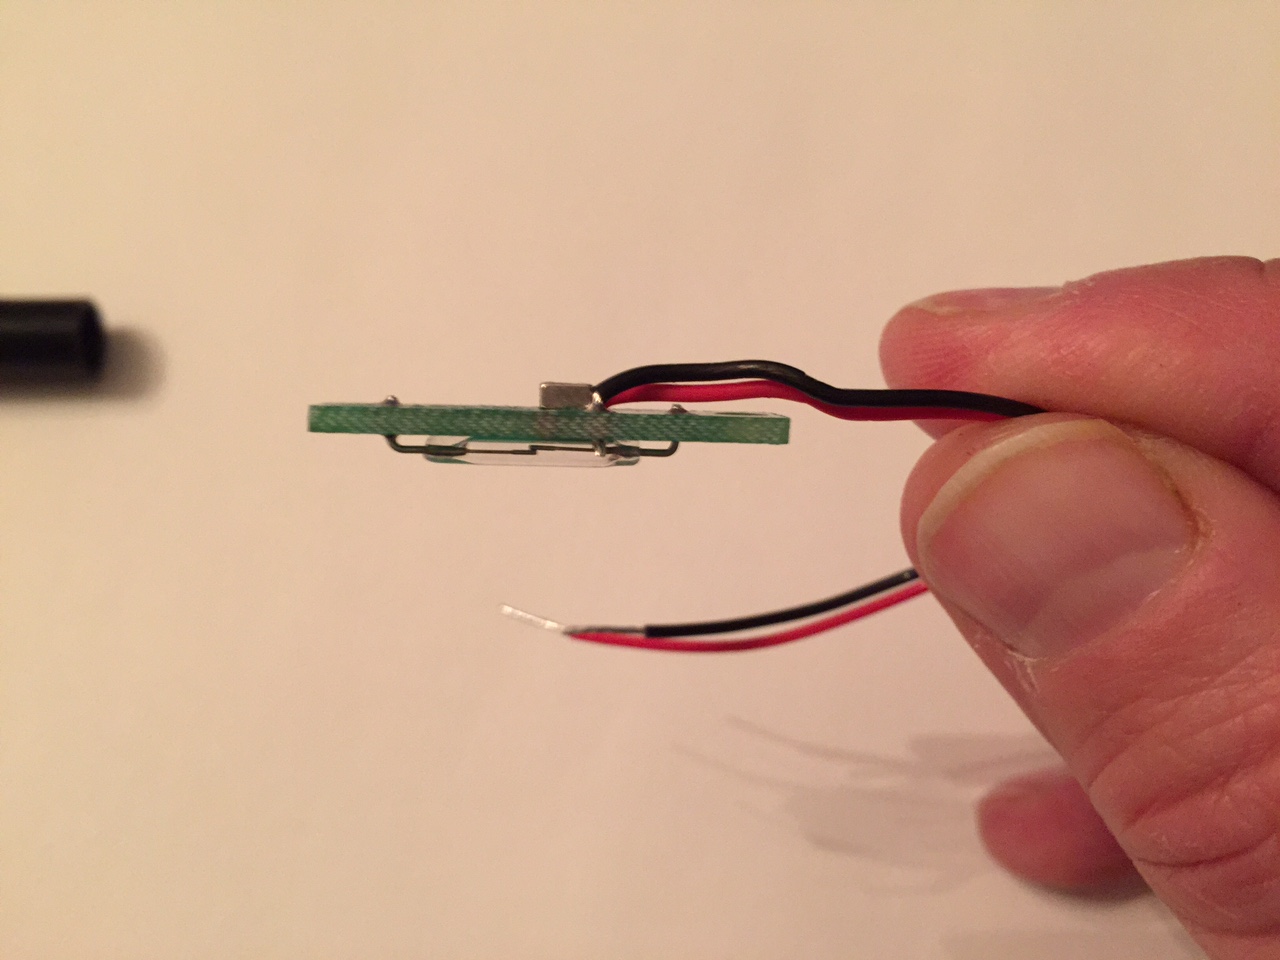 Reed Switch open or normally closed | MySensors